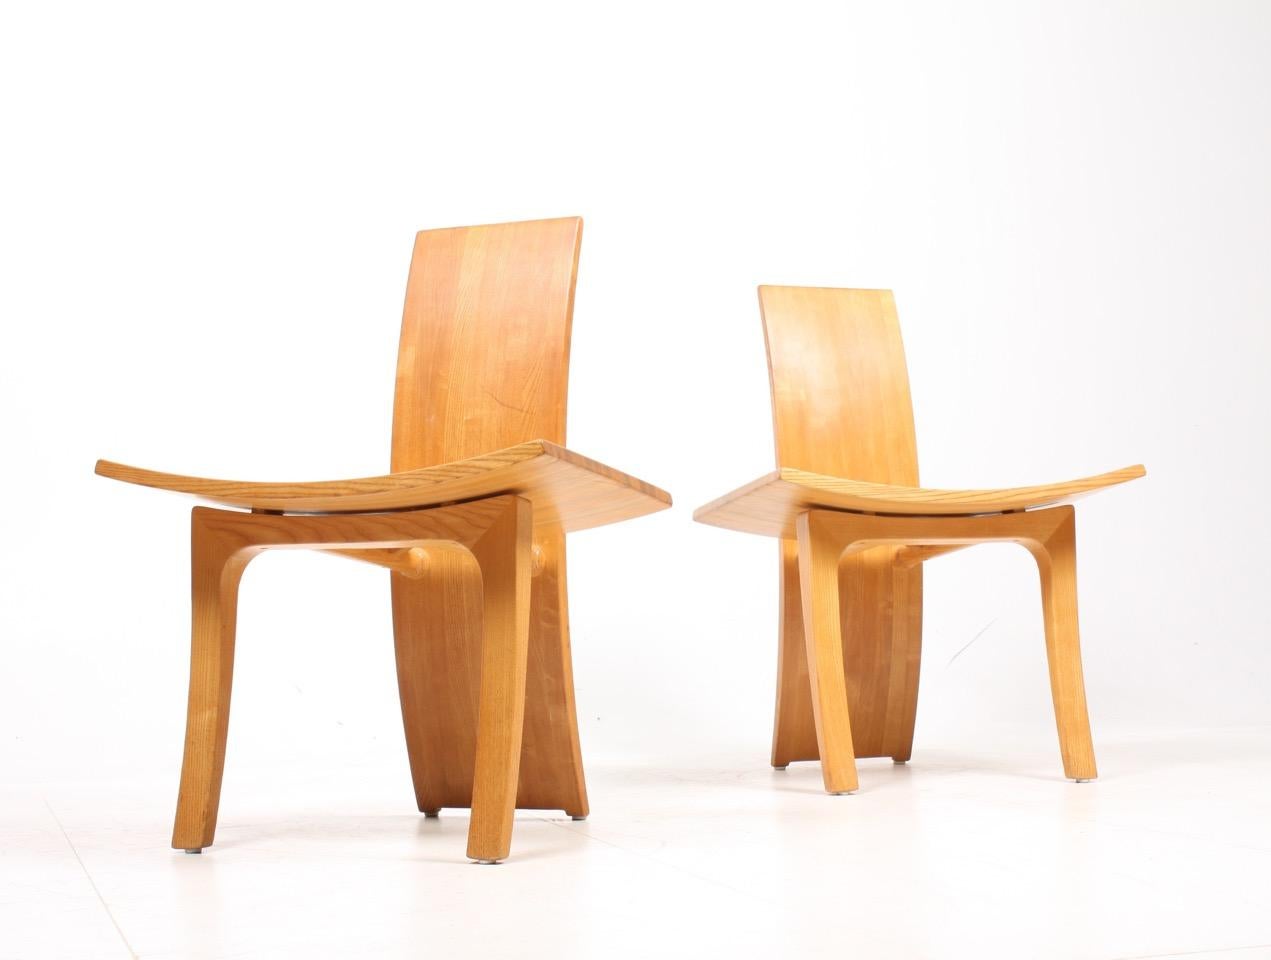 Pair of lounge chairs ashwood. Designed and made by cabinetmaker Walther Nielsen in 1960s. Made in Denmark, Great original condition.